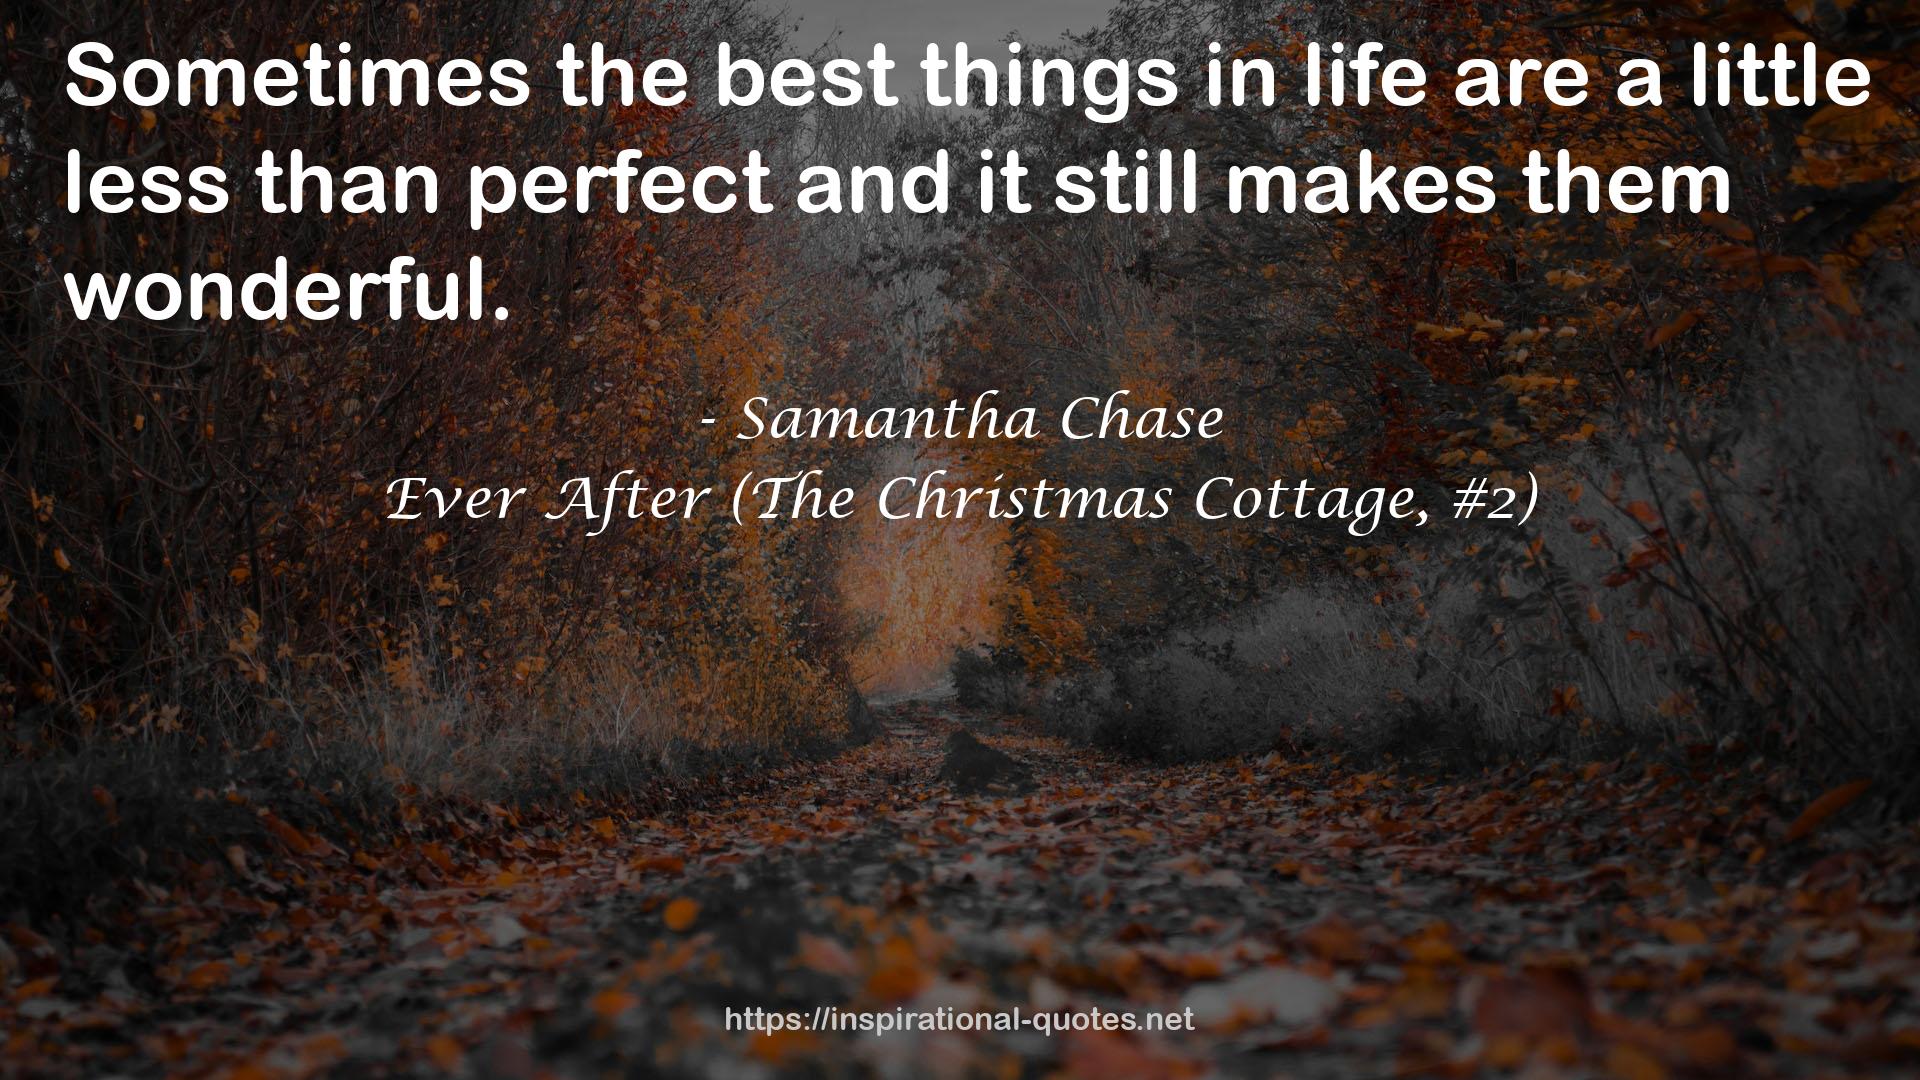 Ever After (The Christmas Cottage, #2) QUOTES